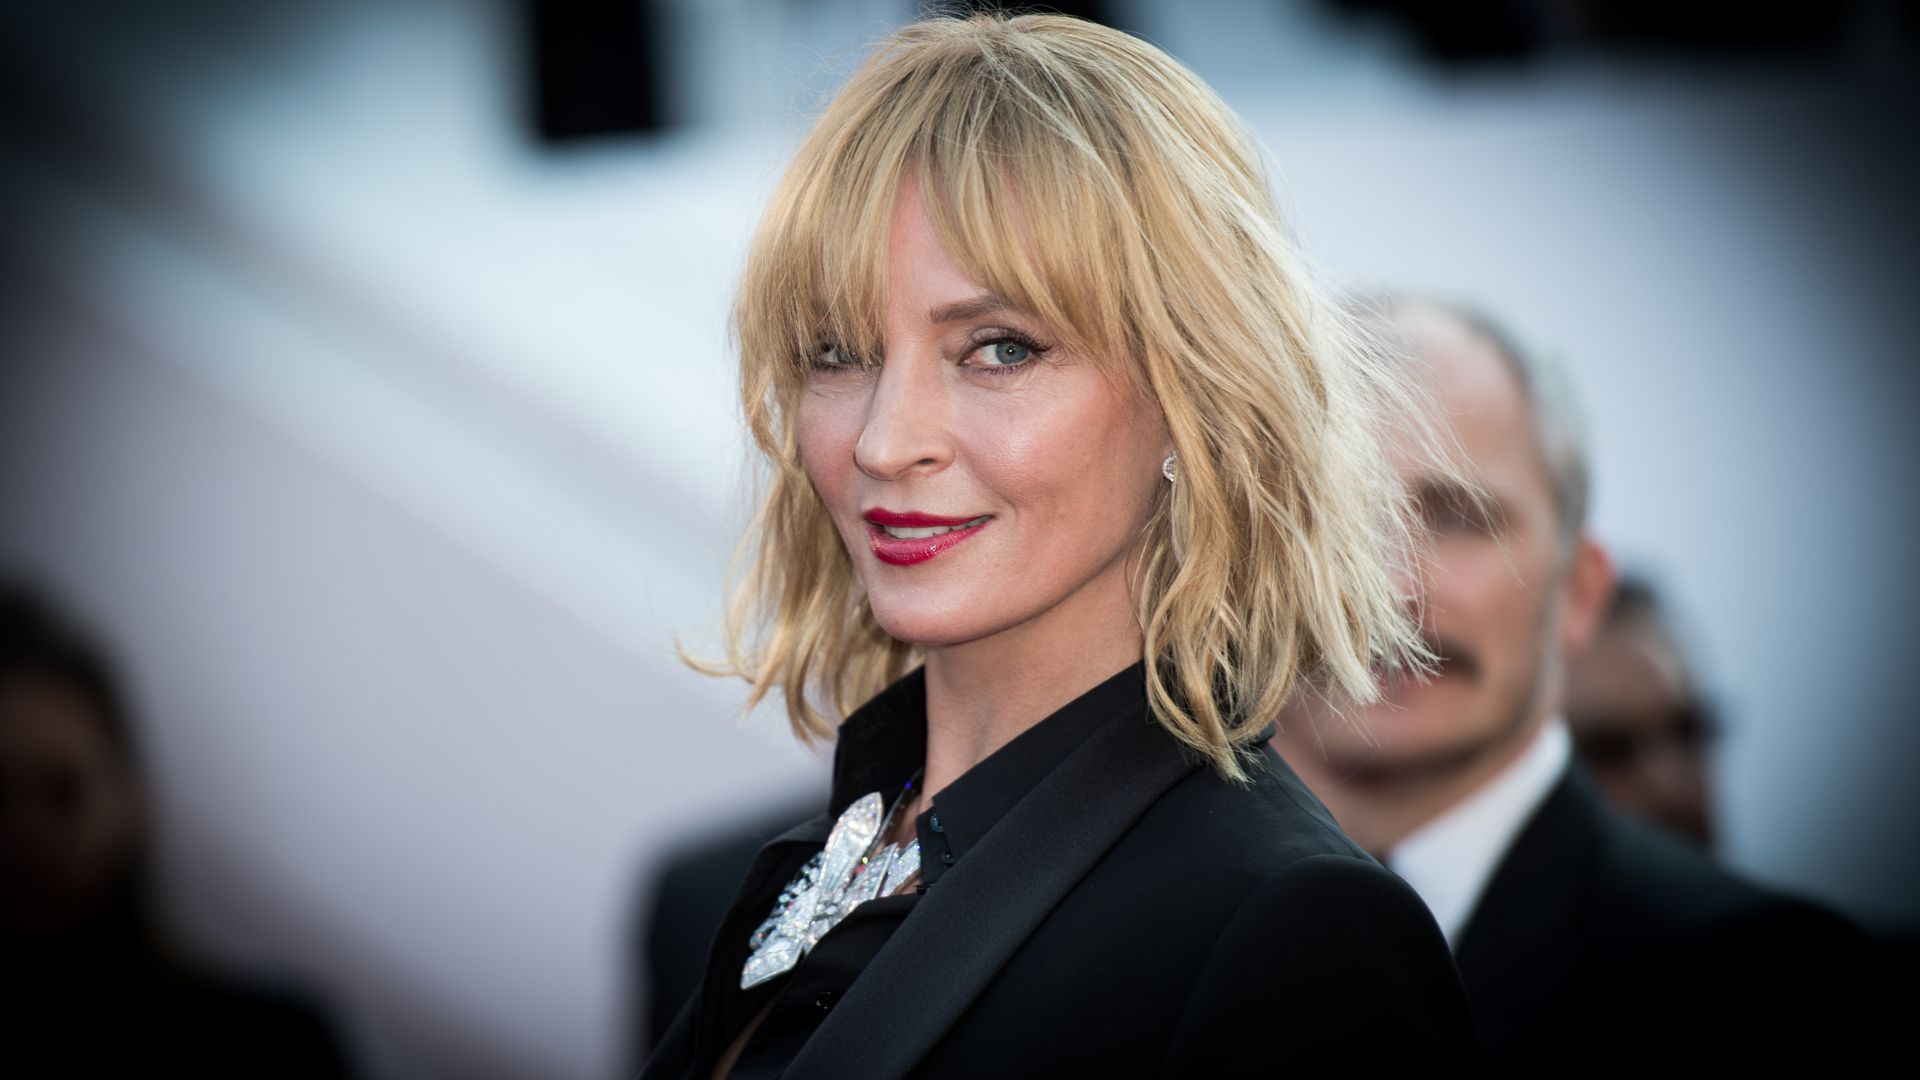 Uma Thurman attends the "Based On A True Story" screening during the 70th annual Cannes Film Festival at Palais des Festivals on May 27, 2017 in Cannes, France.